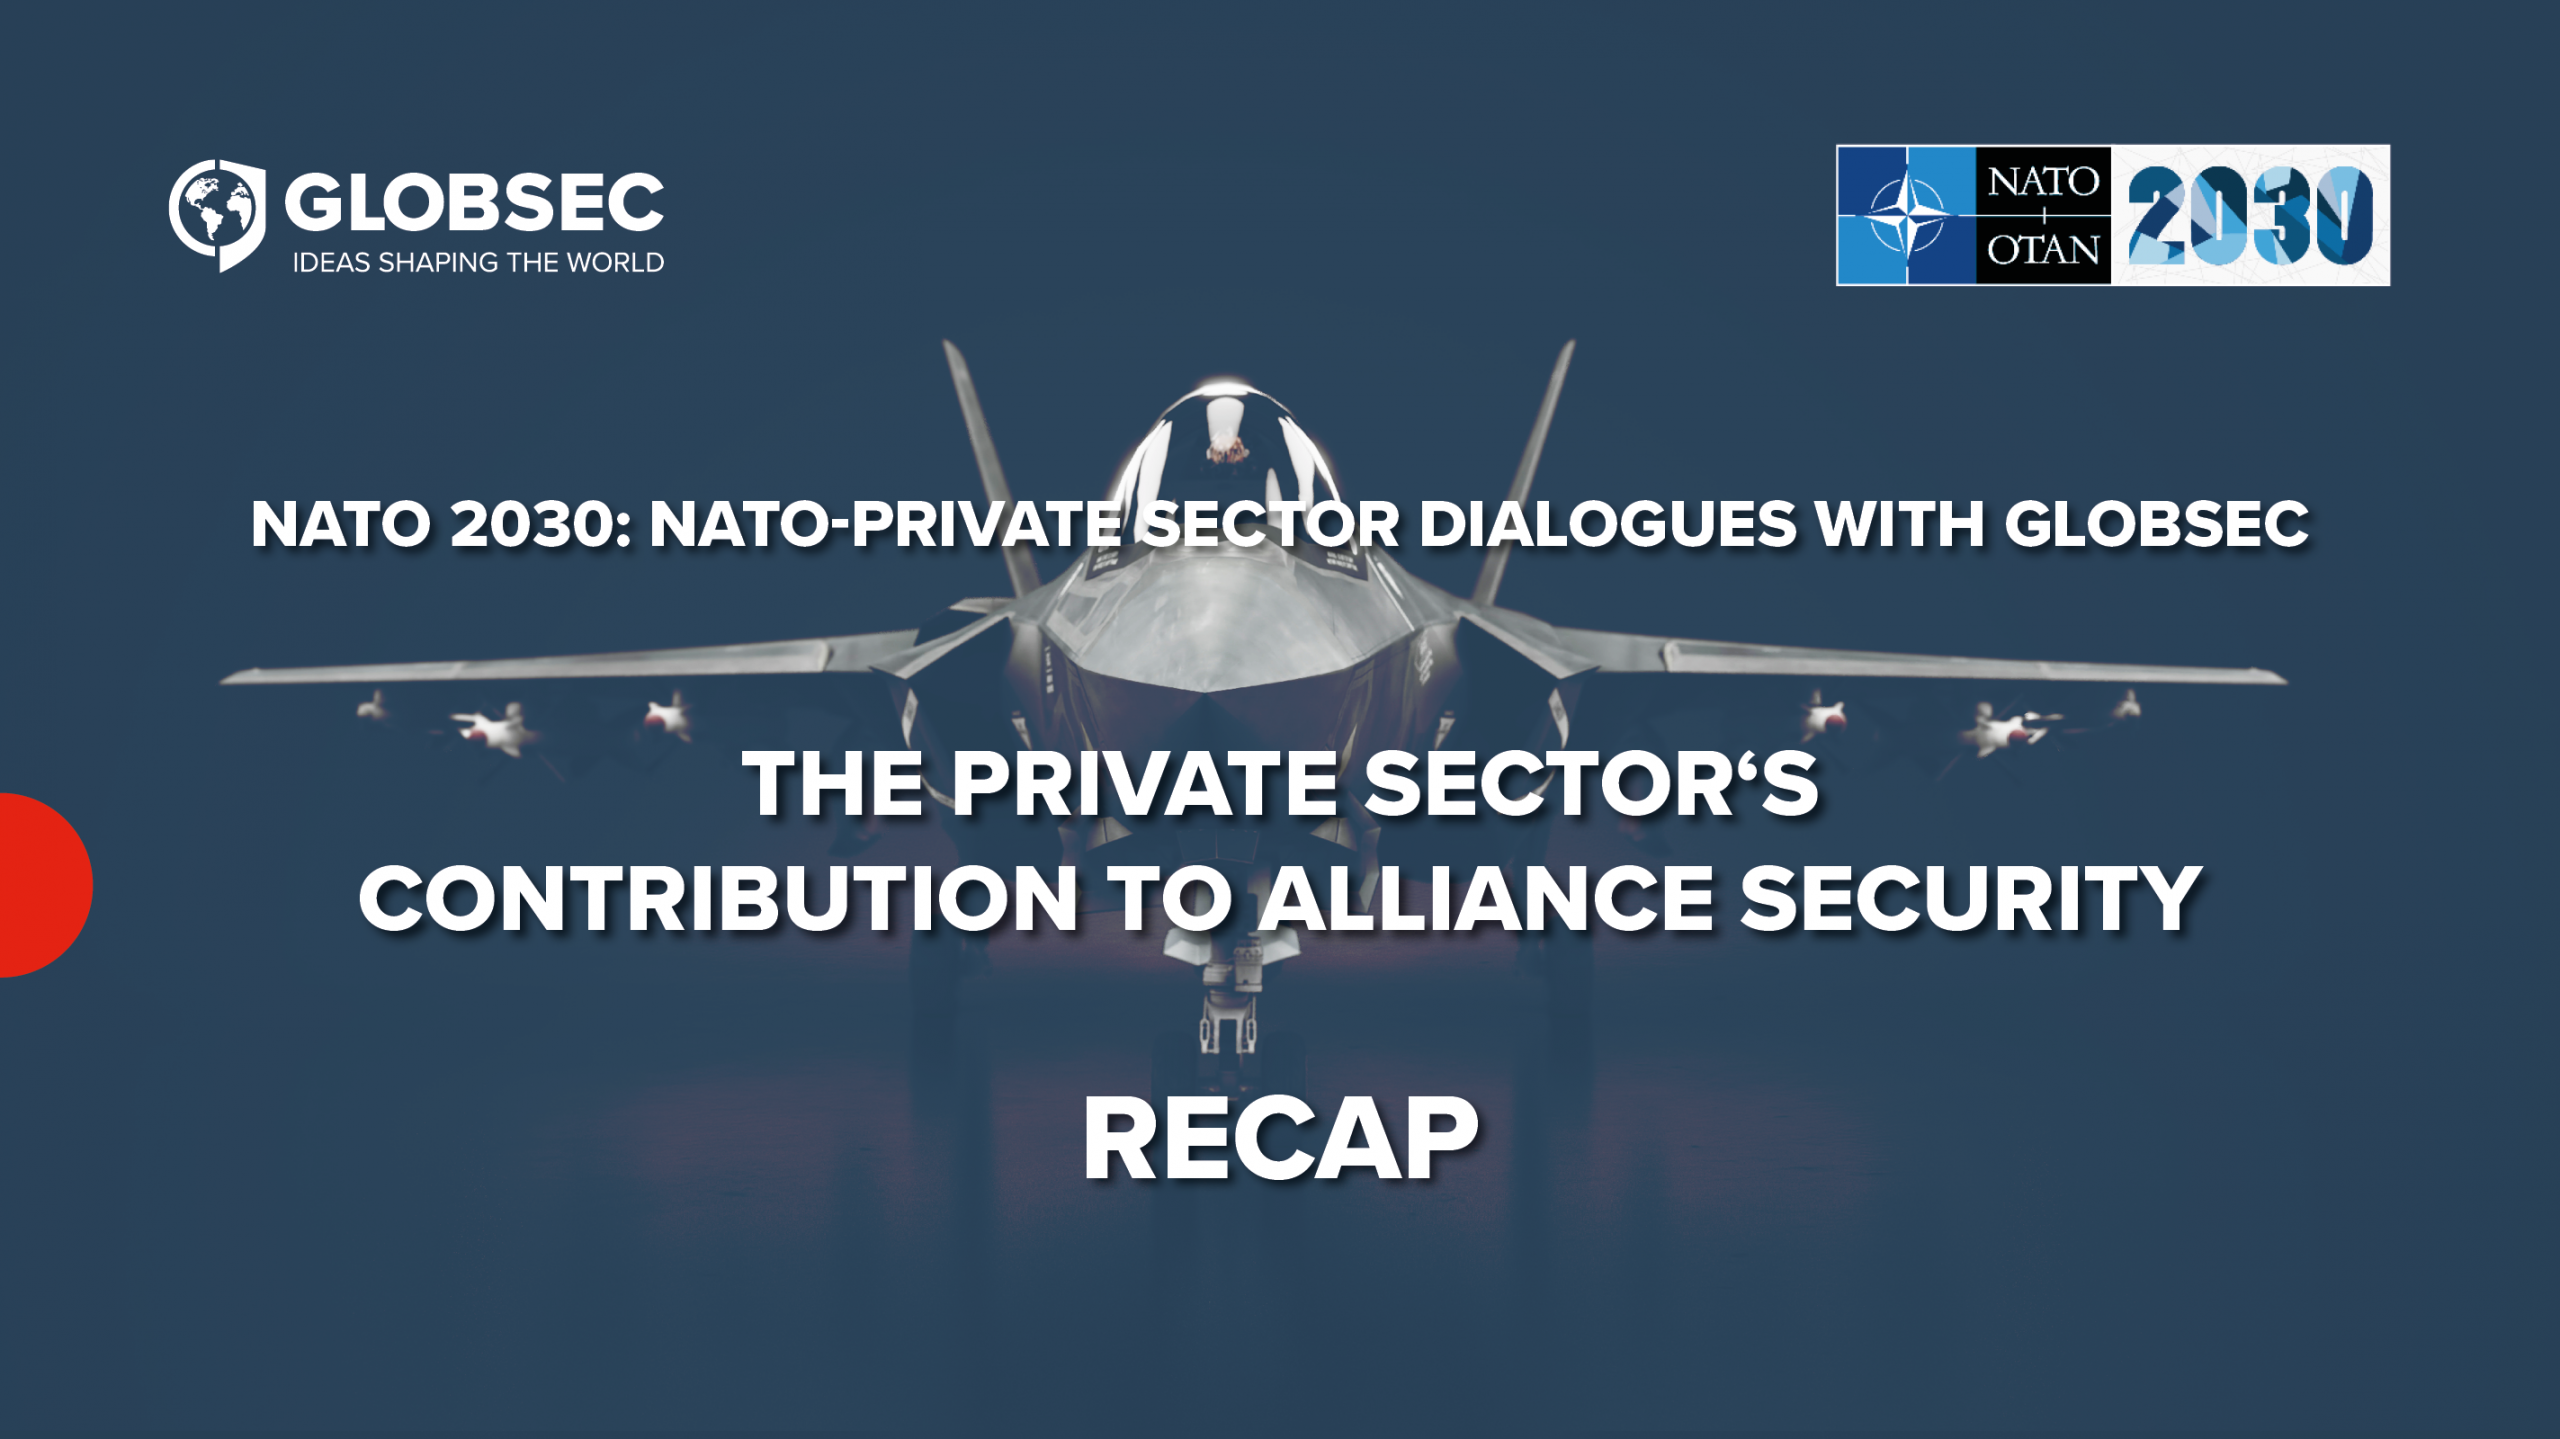 Recap: The Private Sector's Contribution to Alliance Security